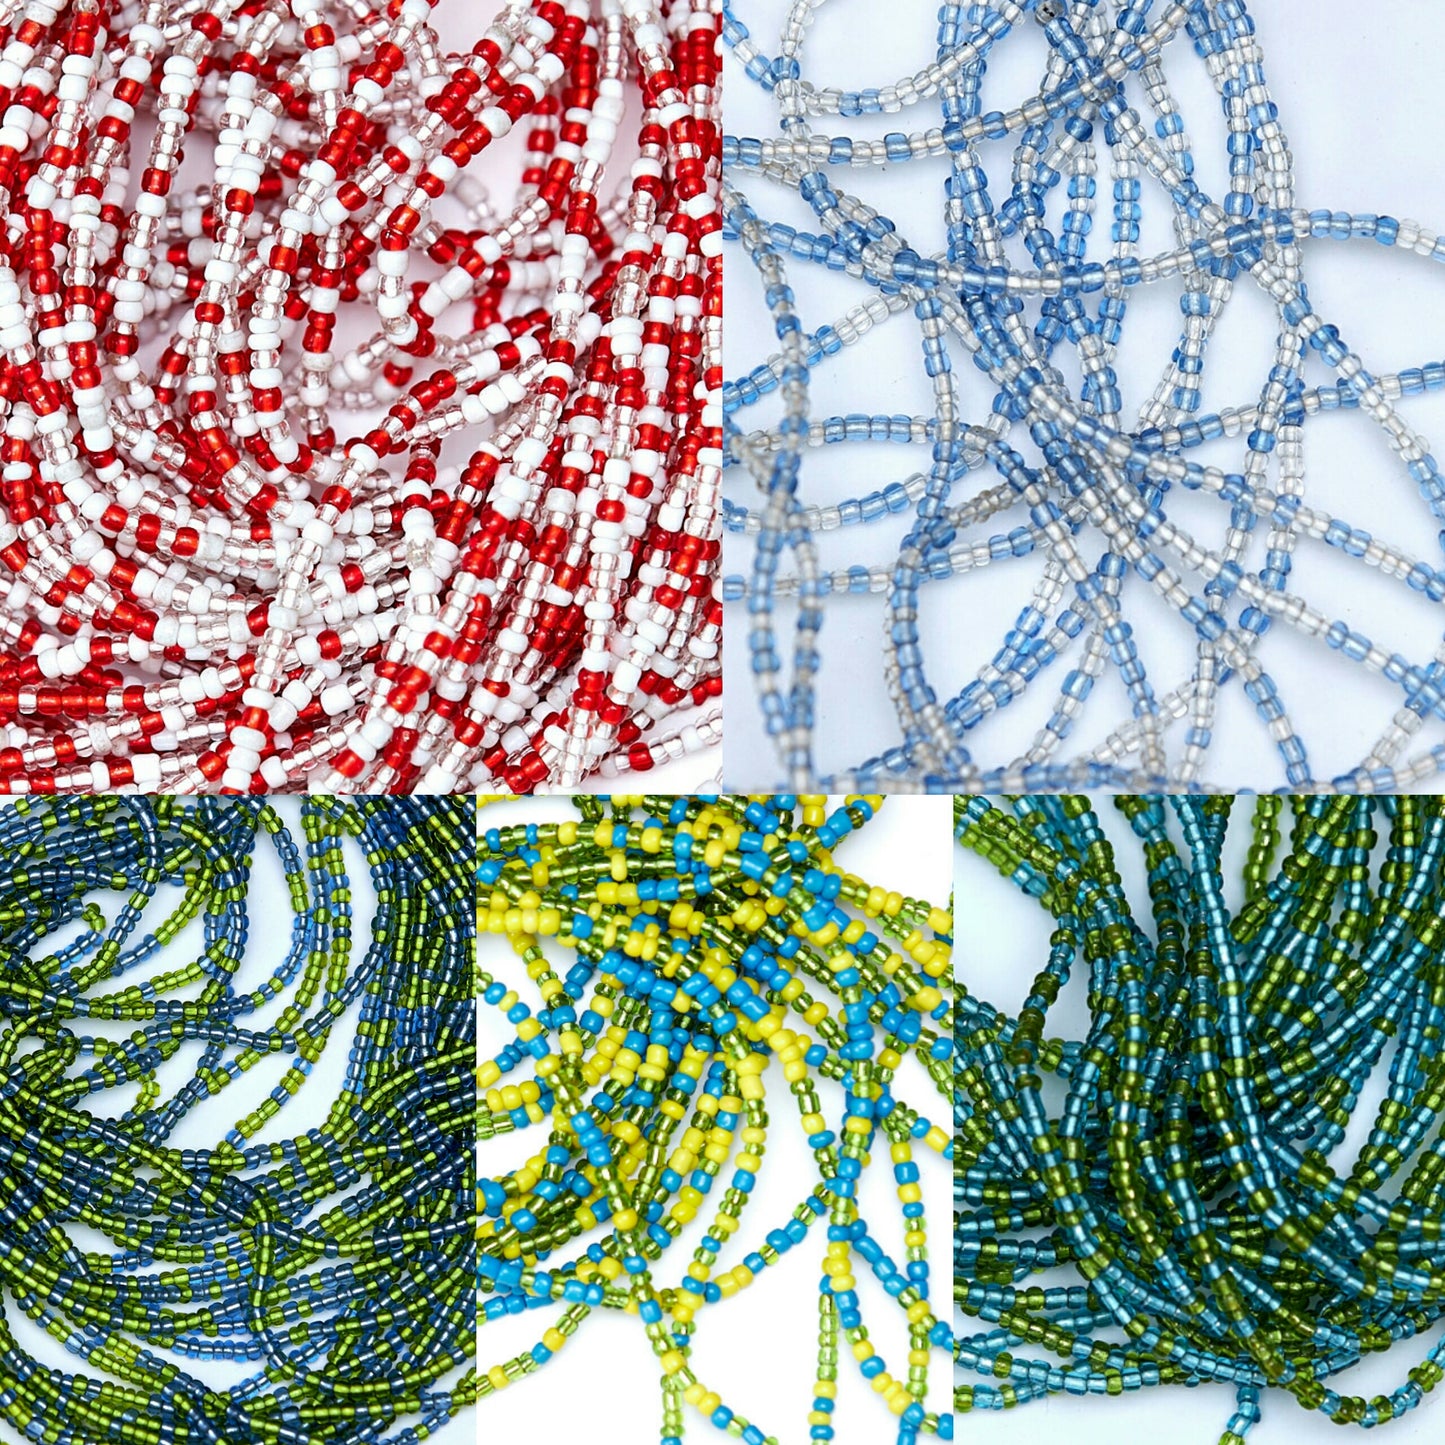 5 Pictures of different Colors of waist beads including 40 Inches Sea Blue And Green Tie on Waist Beads, 40 Inches Light Blue And Green Tie on Waist Beads, 40 Inches Blue and Clear Crystal Tie On Waist Beads, 40 Inches Red And White Tie on Waist Beads, and 44 Inches Yellow And Blue Tie on Waist Beads.